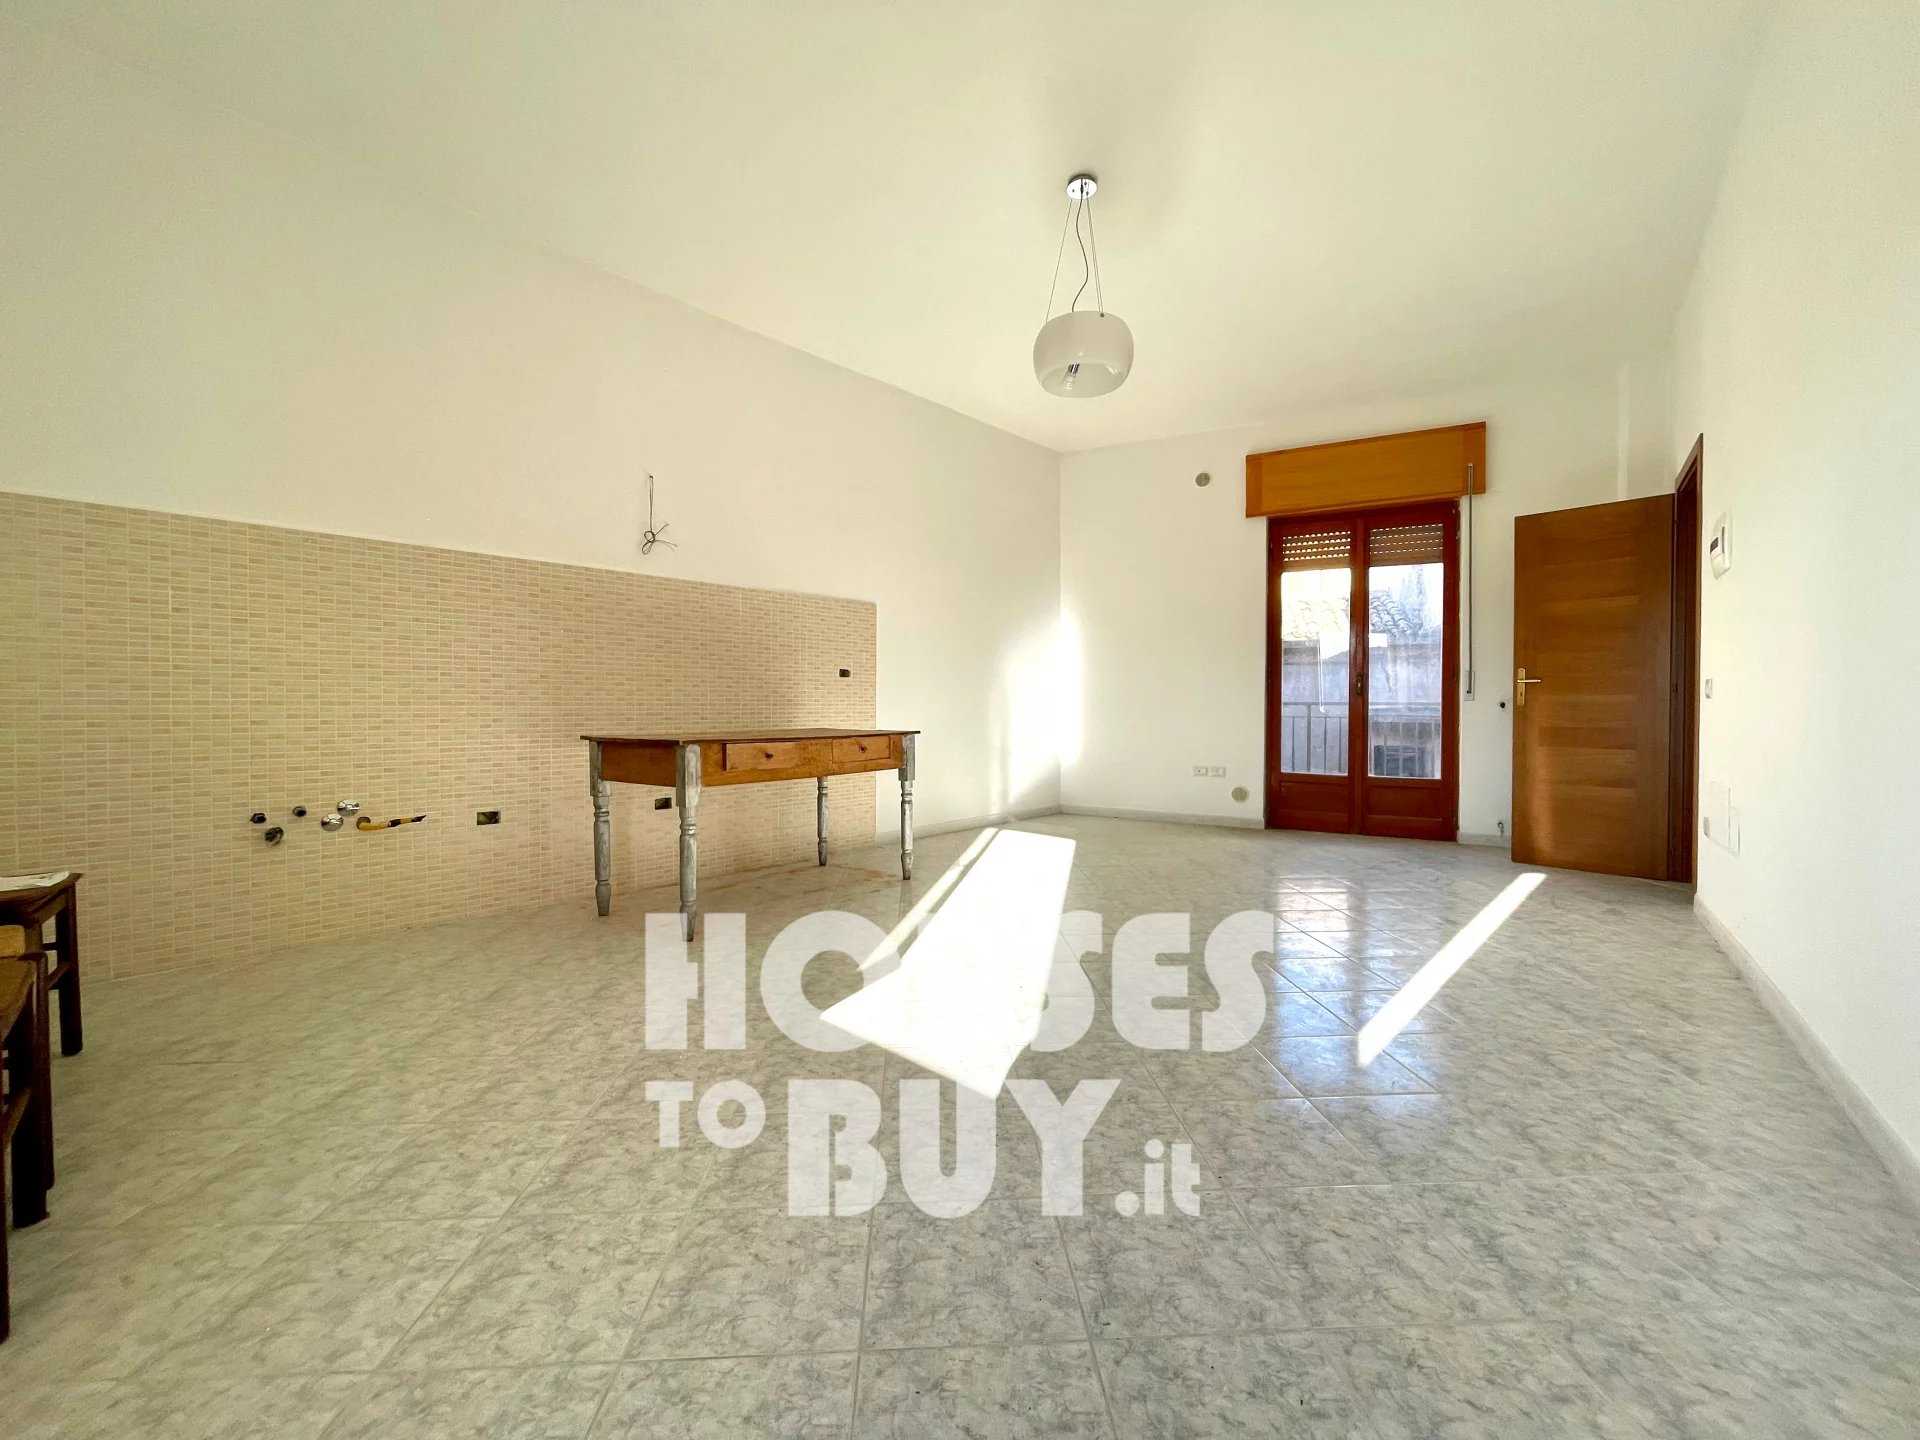 Multiple Houses in Carfizzi, Calabria 12183664